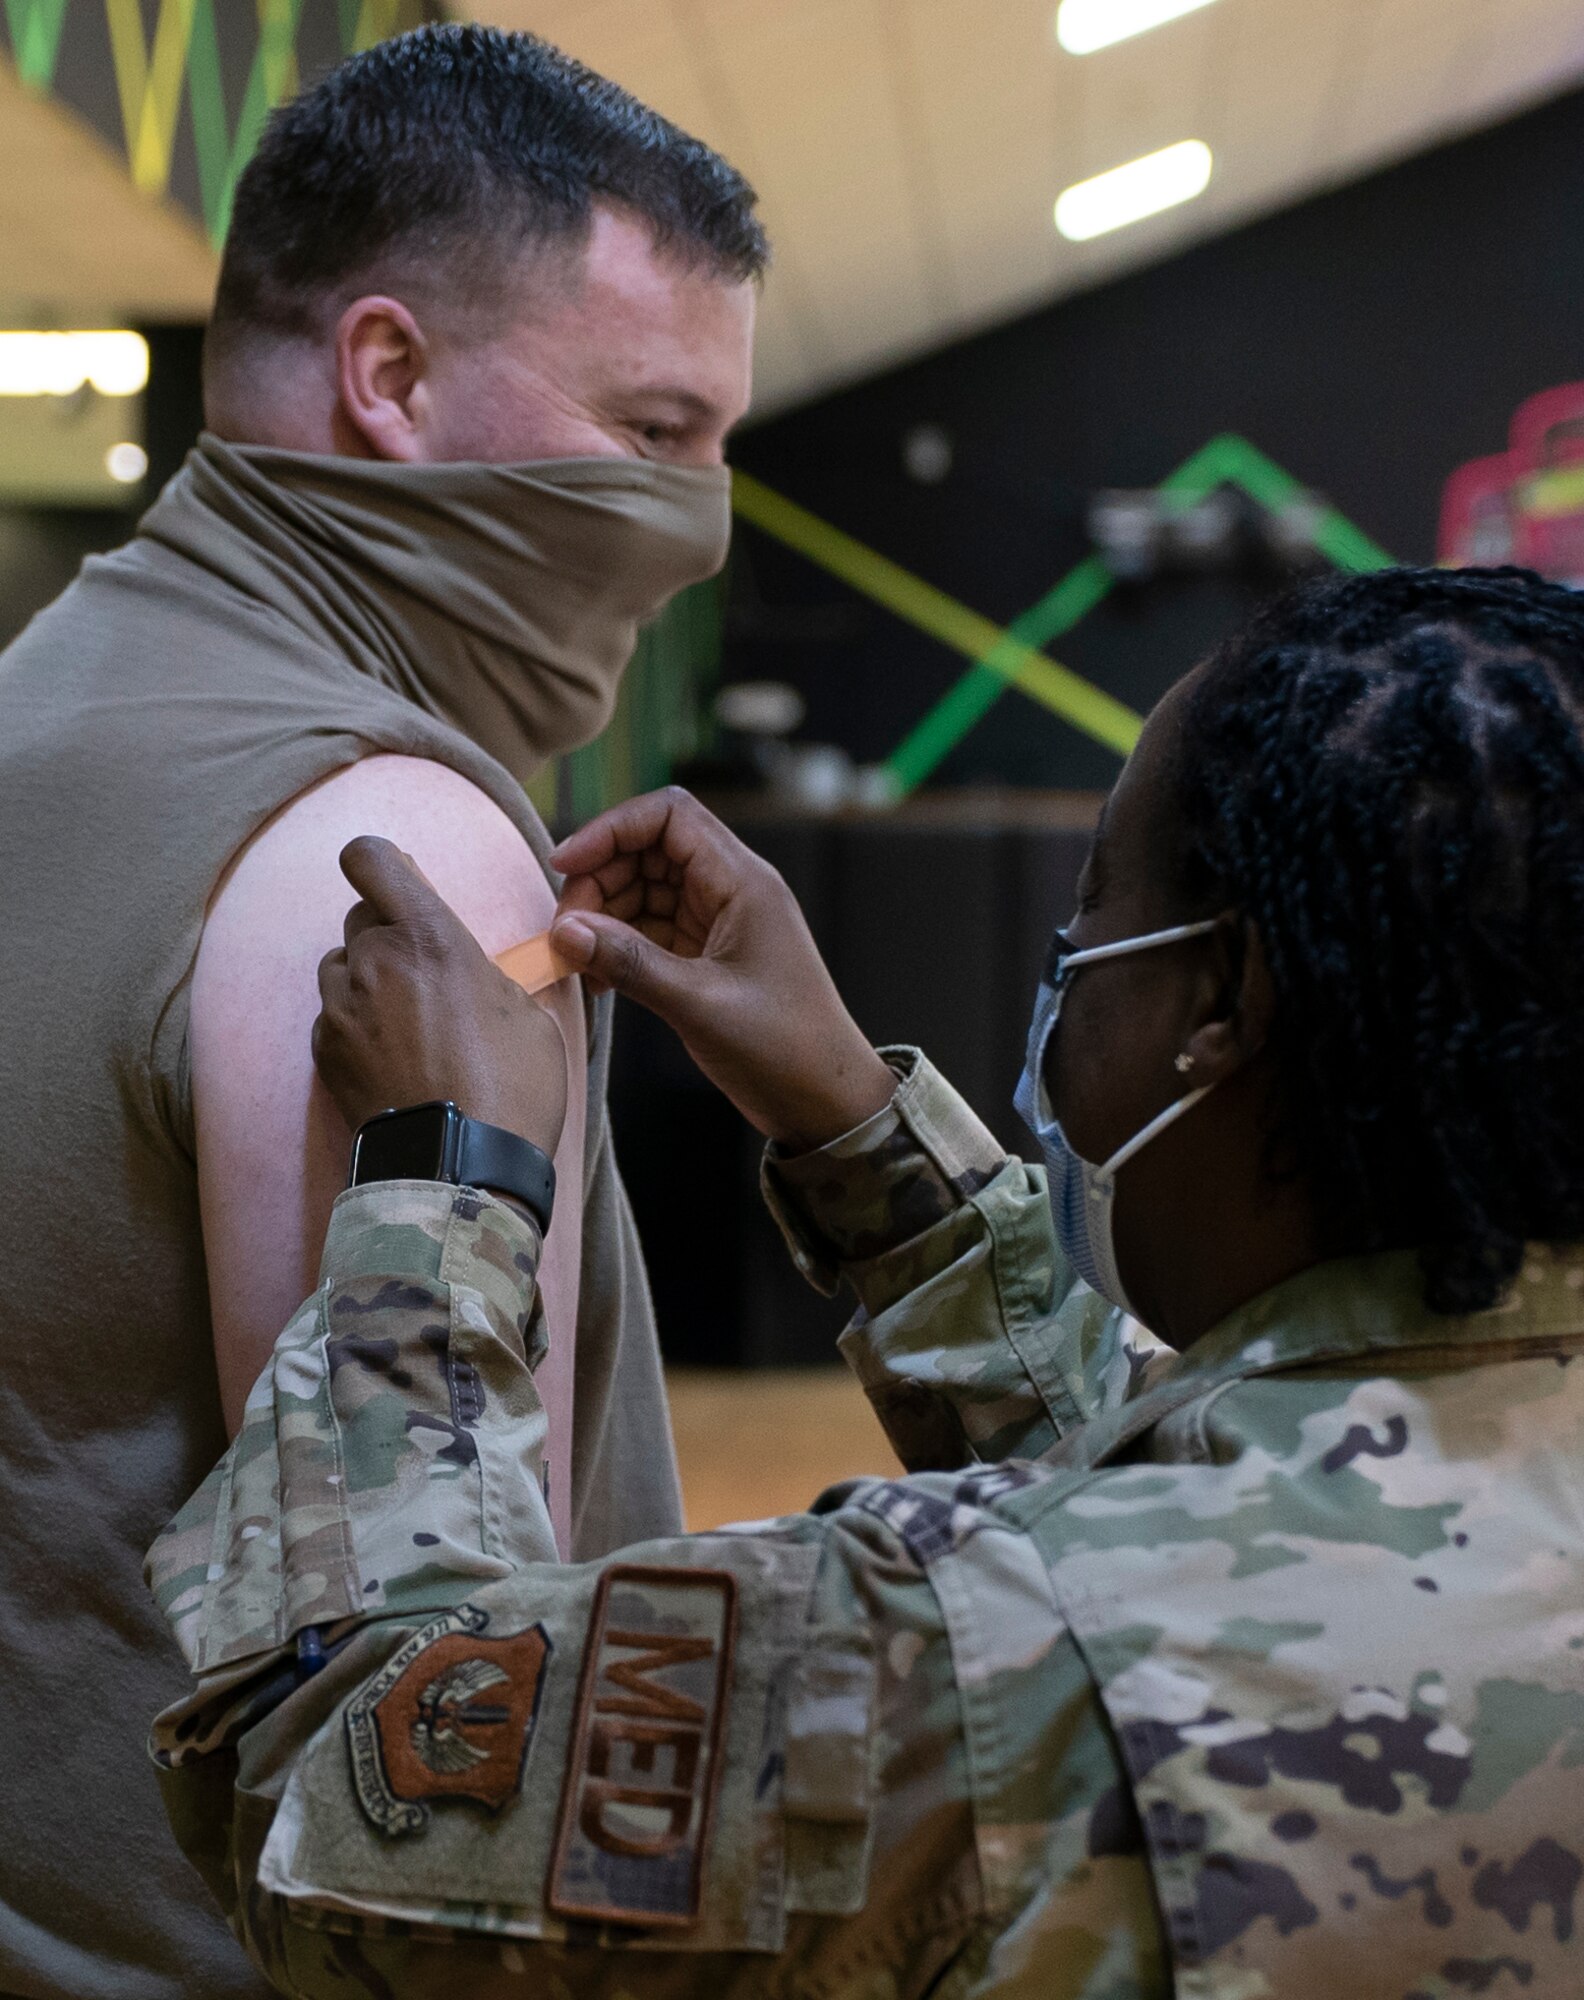 U.S. Air Force Tech. Sgt. Christopher Rex, 48th Contracting Squadron contract specialist, received the 10,000th COVID-19 vaccine to be administered by the 48th Medical Group at  Royal Air Force Lakenheath, England, April 16, 2021. Personnel were prioritized to receive the vaccine based on the guidance from the Centers for Disease Control and Prevention and on the DoD COVID Task Force’s assessment of unique DoD mission requirements. (U.S. Air Force photo by Airman 1st Class Jessi Monte)